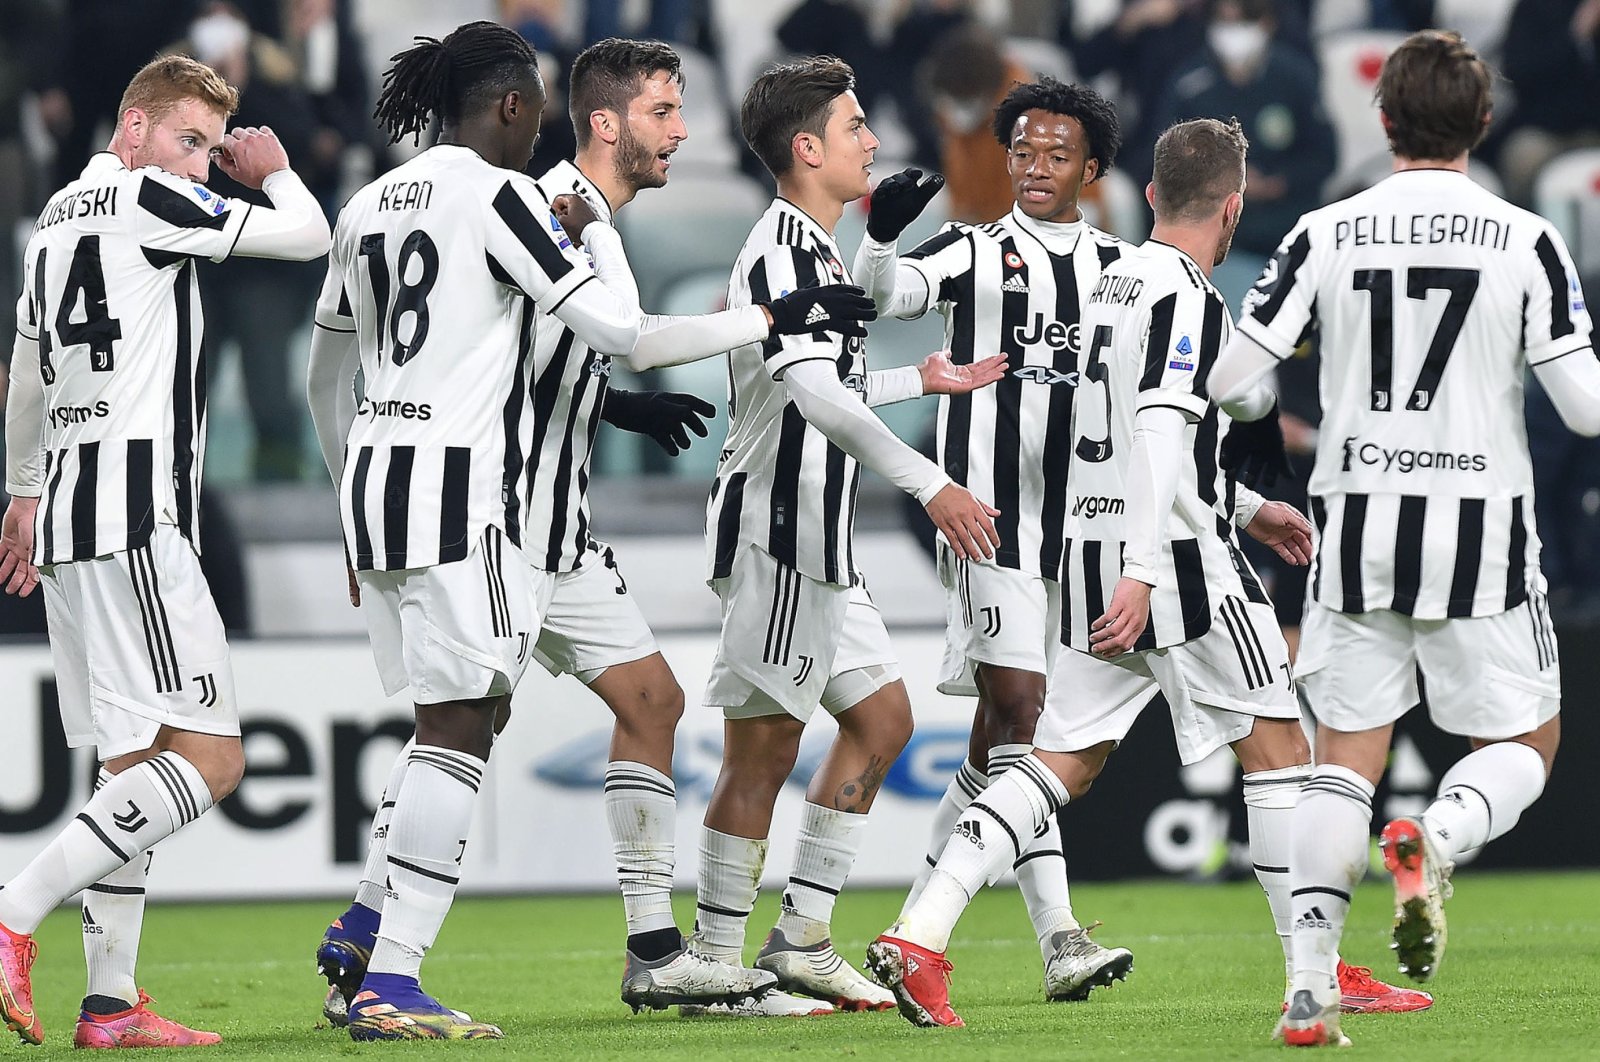 Juventus’ Paulo Dybala (C) celebrates with teammates after scoring a goal in a Serie A match against Udinese in Turin, Italy, Jan. 15, 2022. (EPA Photo)